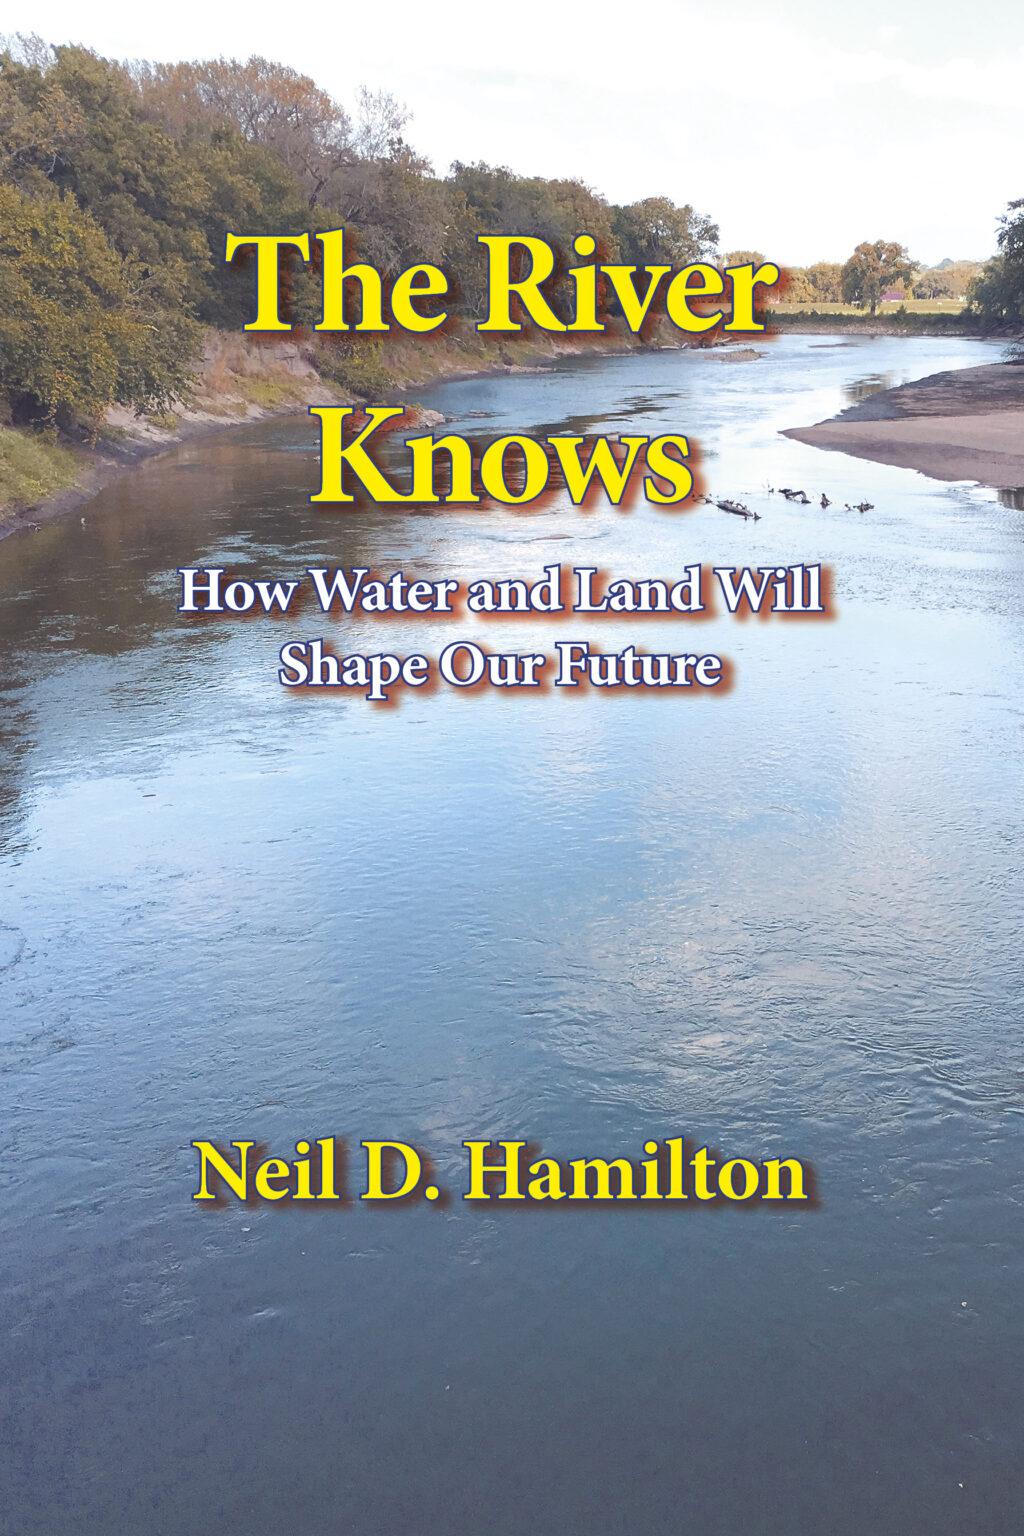 The River Knows: How Water and Land